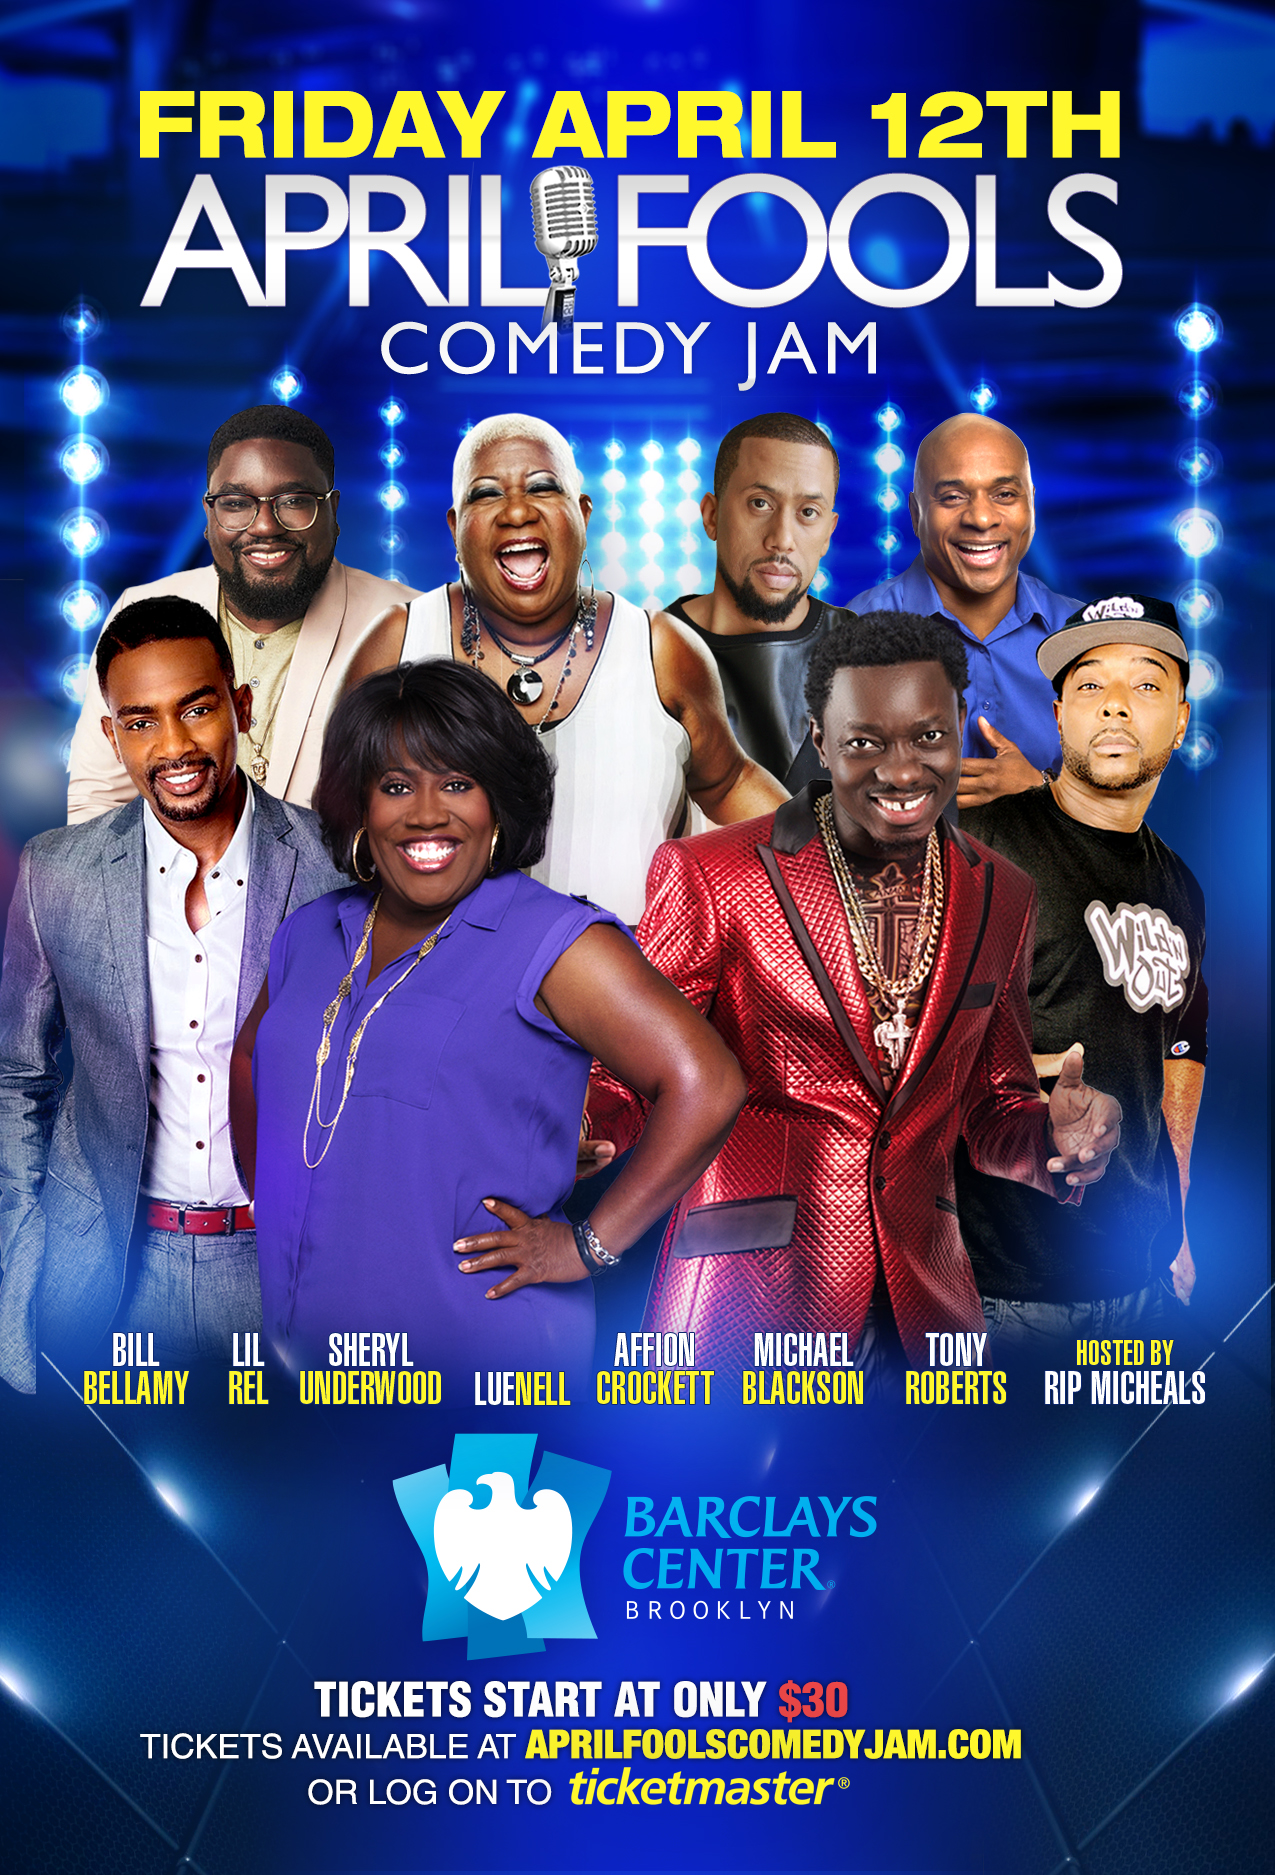 Brooklyn's Barclays Center to Host April Fools Comedy Jam With Sheryl